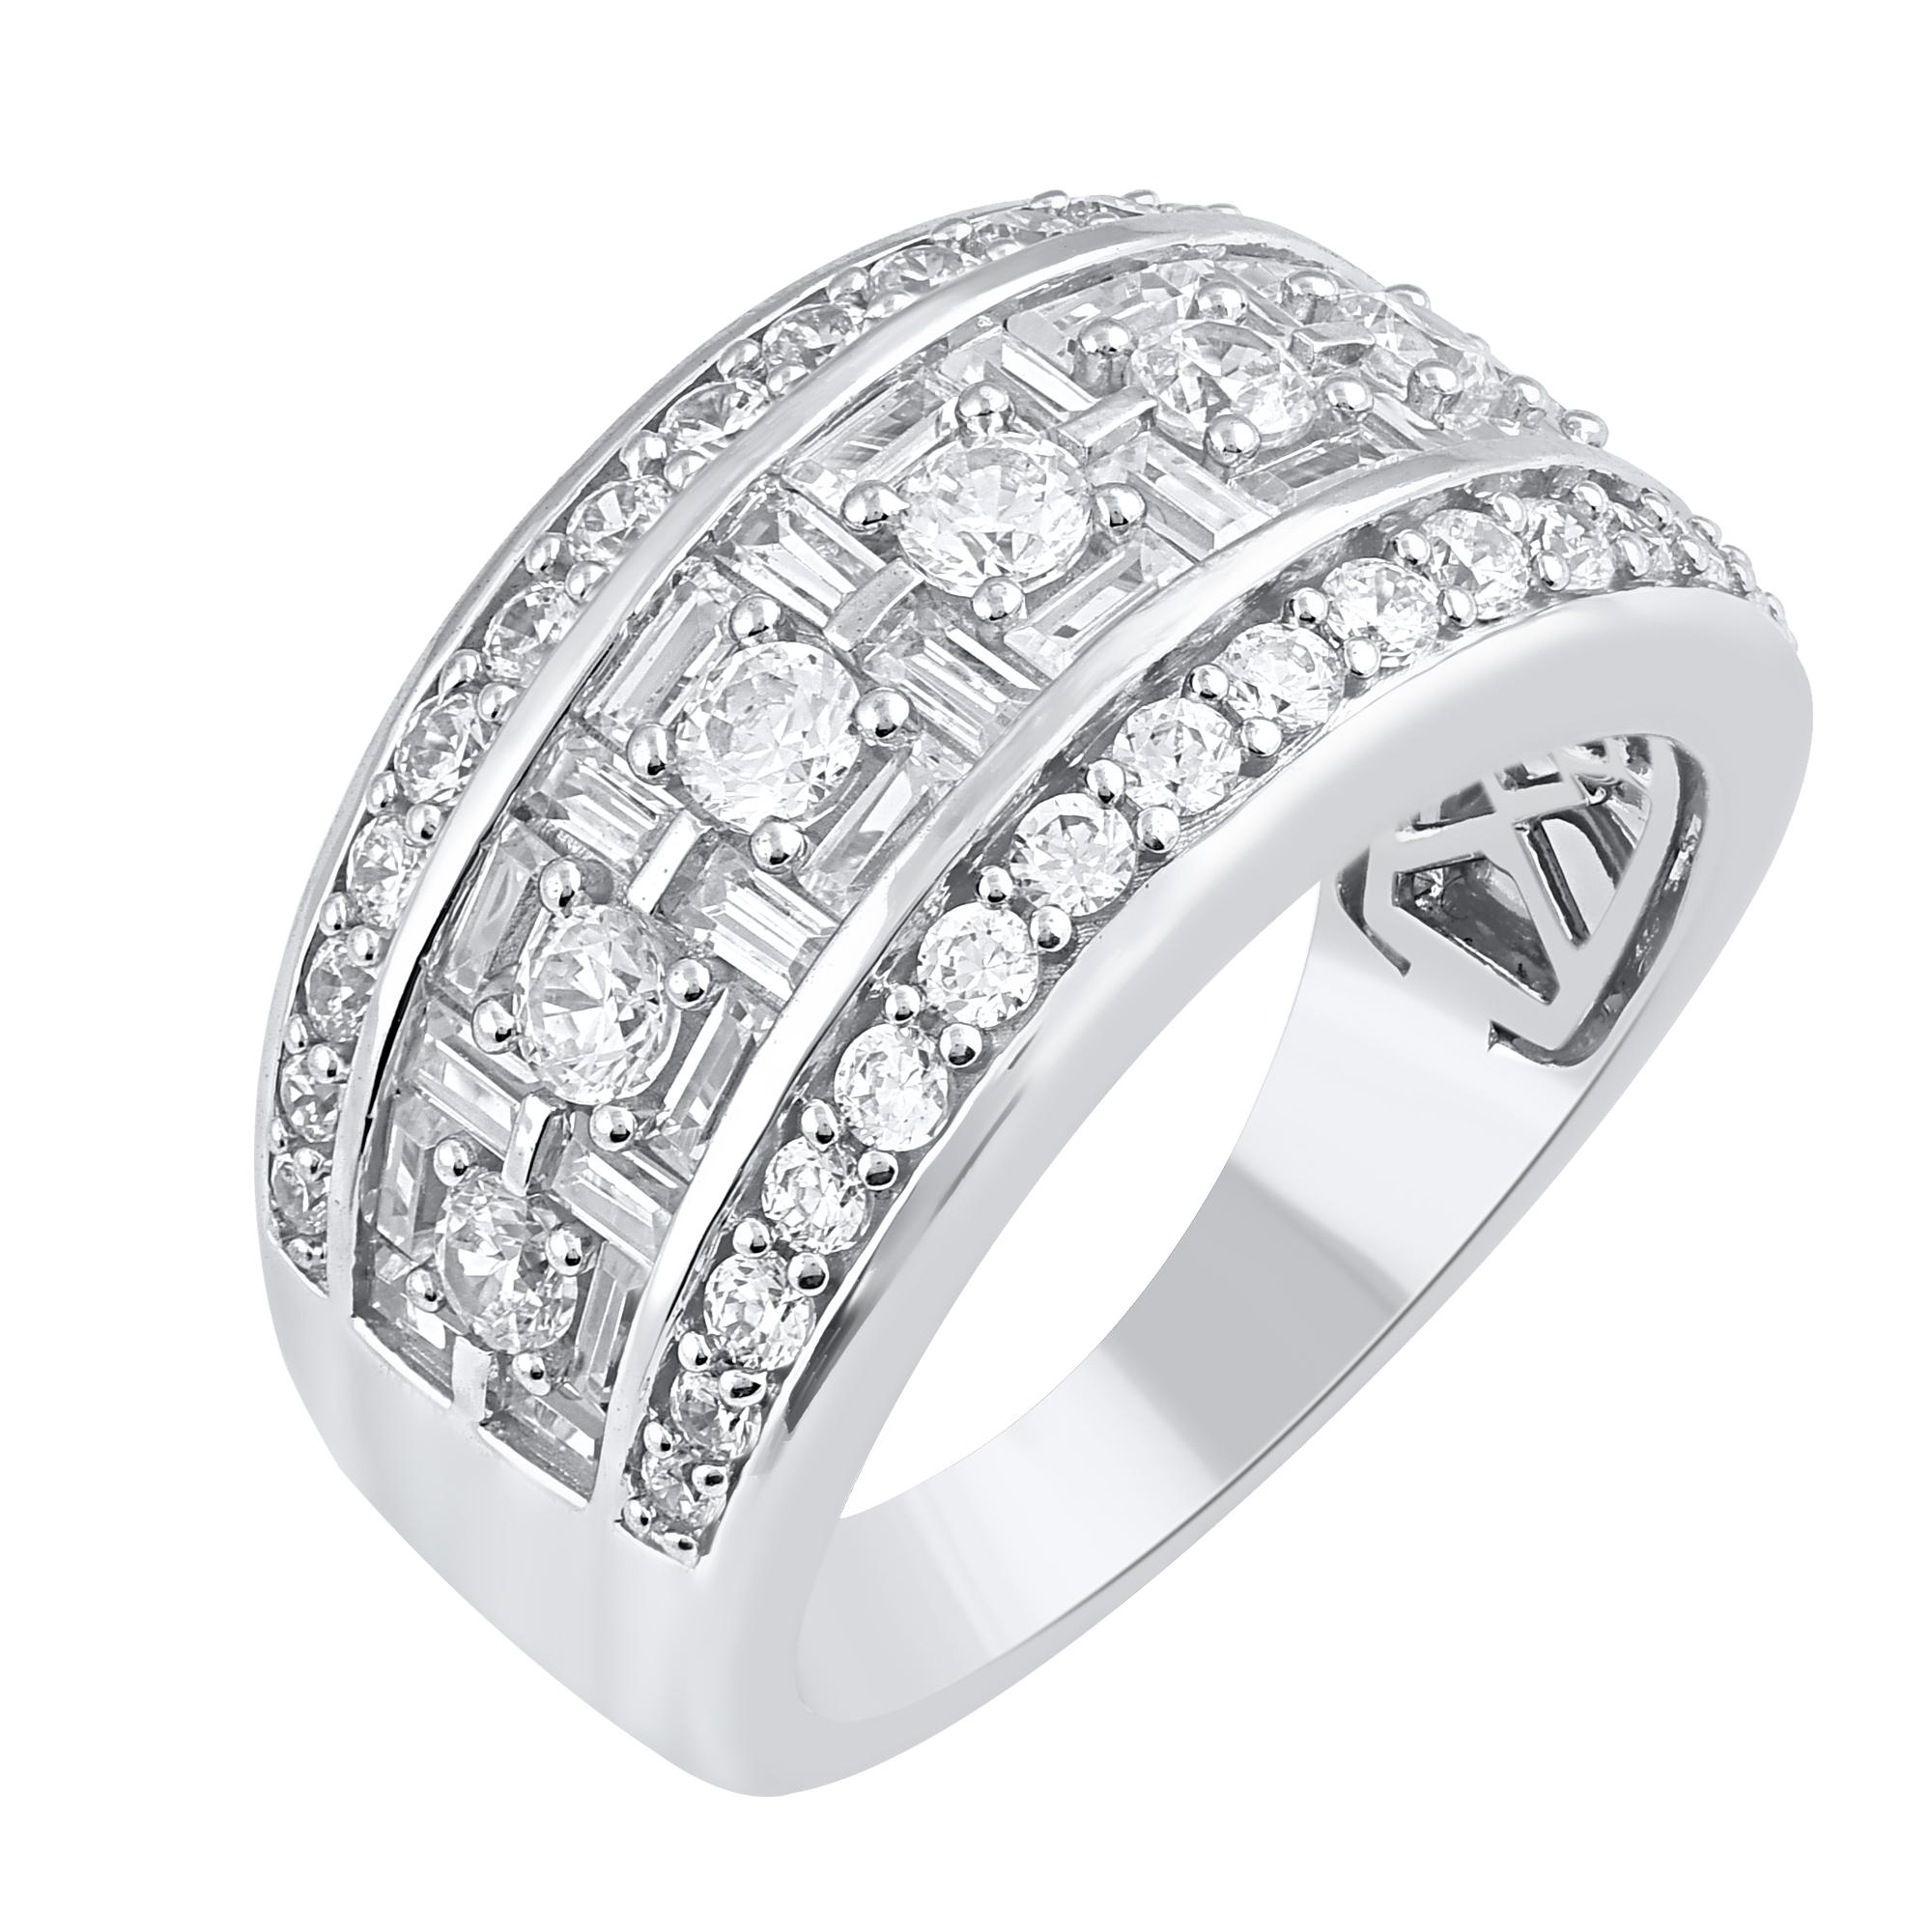 Complete your bridal look with a timeless design. These beautiful wedding band ring is studded with 69 brilliant cut and baguette cut natural diamonds in pave & channel setting. Crafted in 14 karat white gold. The total diamond weight of these